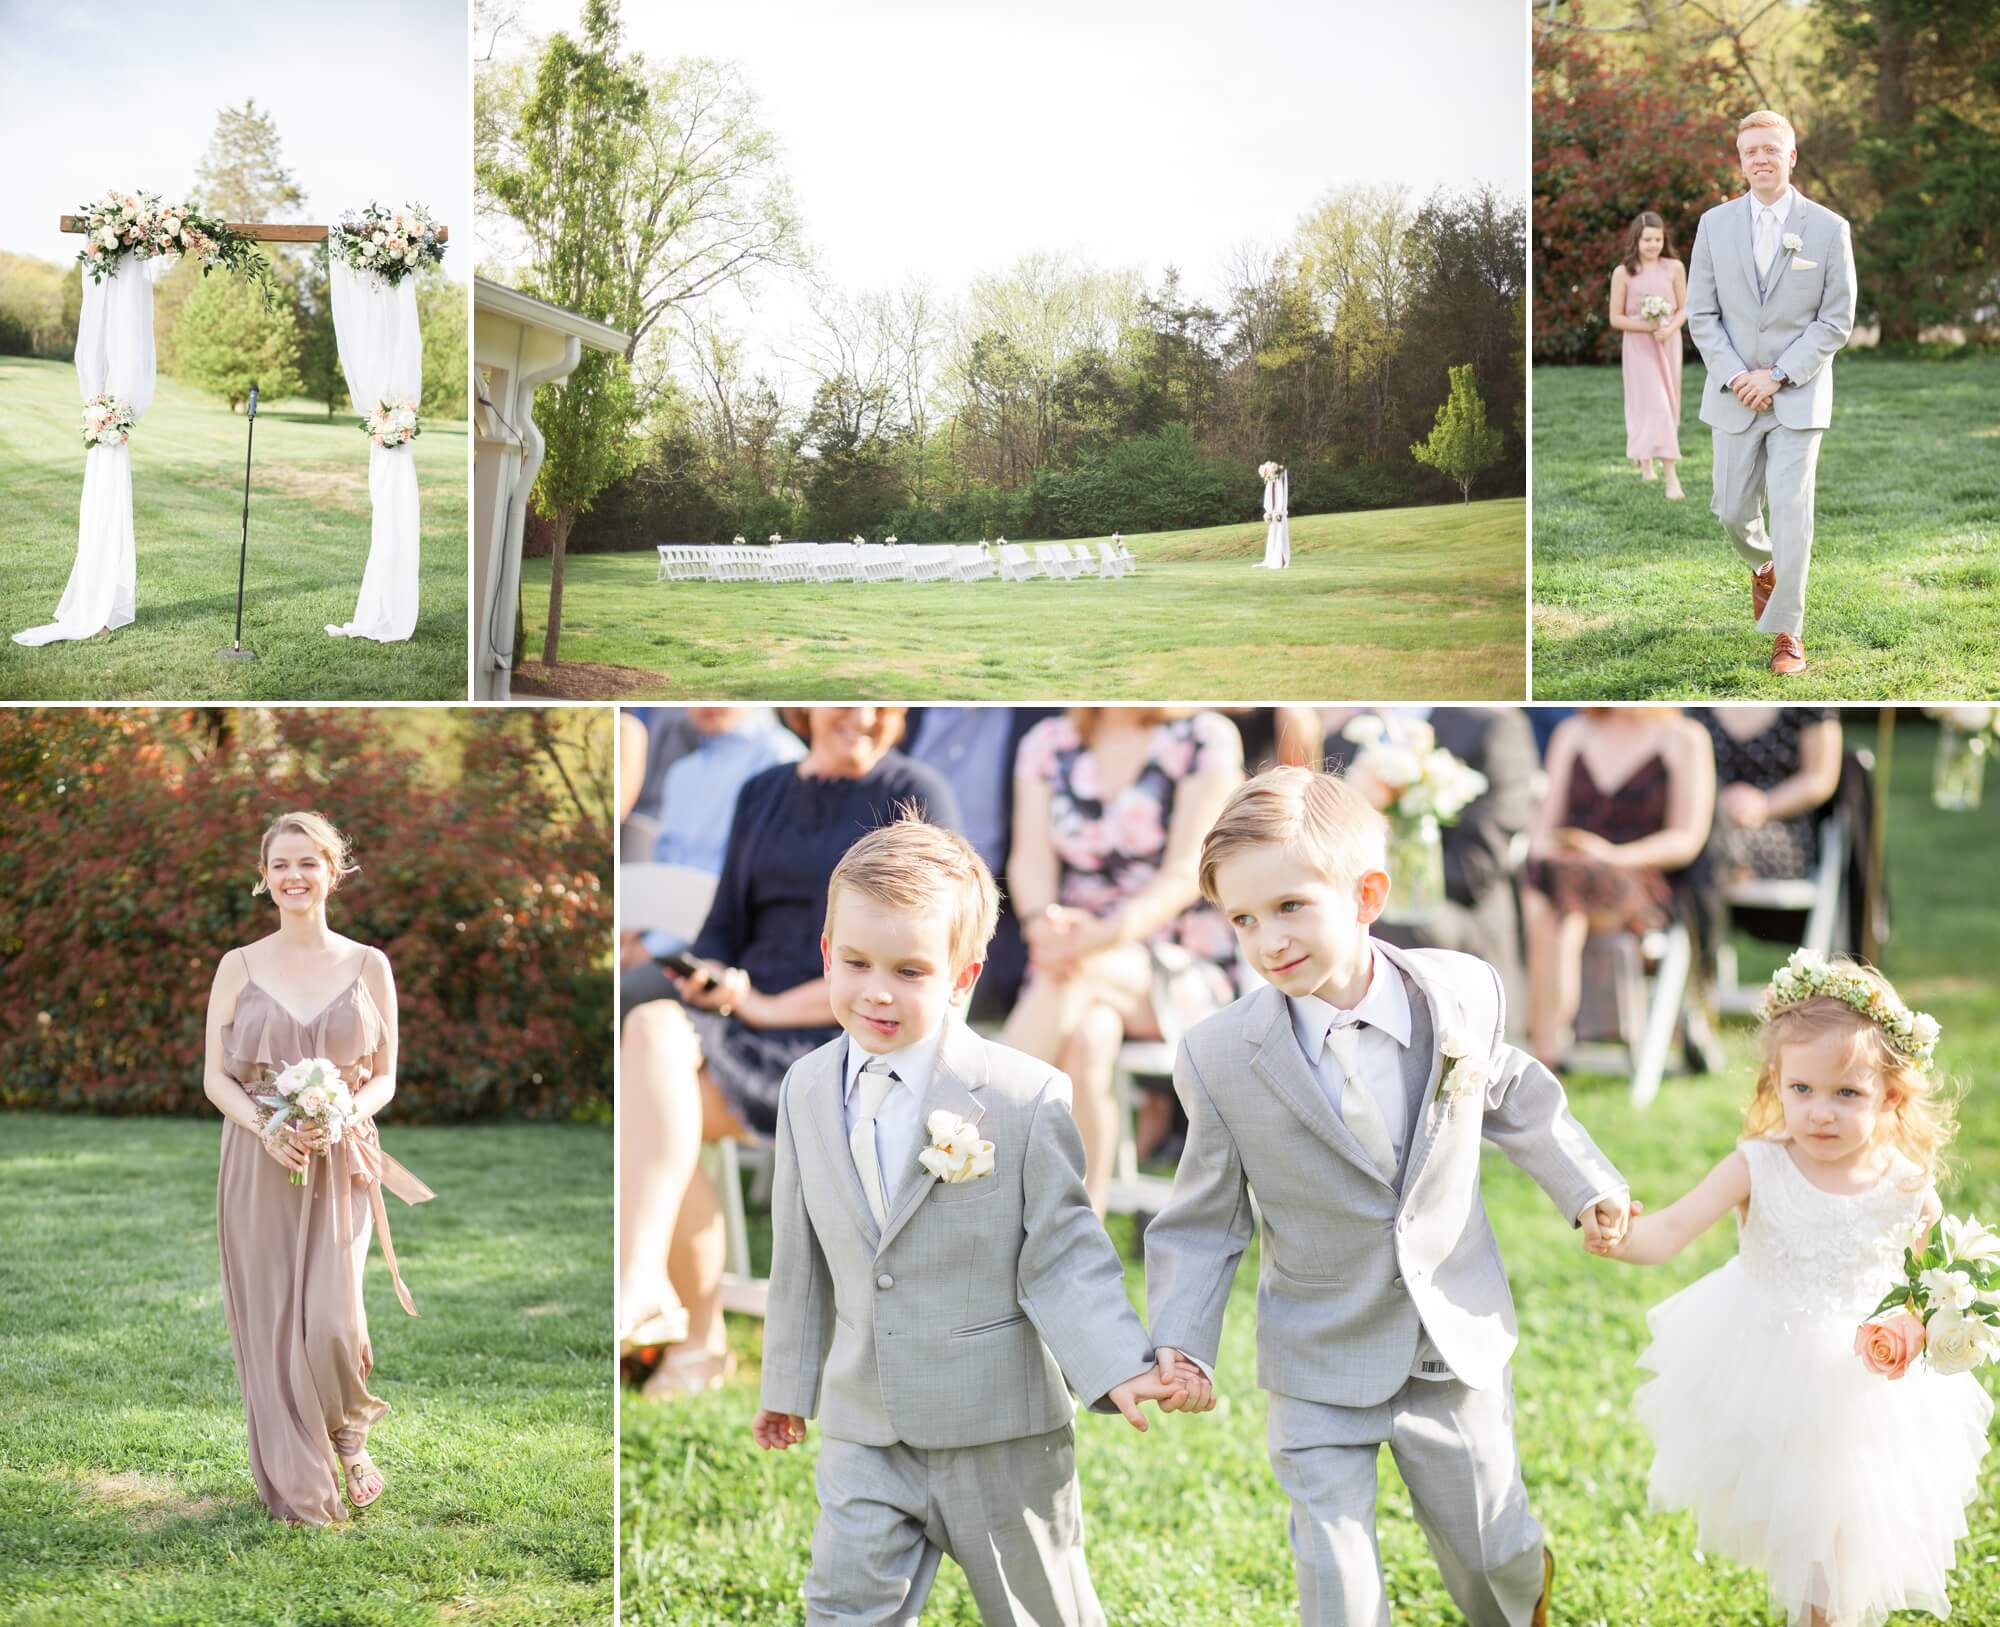 Bridal party, flower girl and ring bearer enter wedding ceremony. Spring wedding at Cedarwood Weddings in Nashville, TN. Photo by Krista Lee Photography, from Sam and Izzy's wedding day.